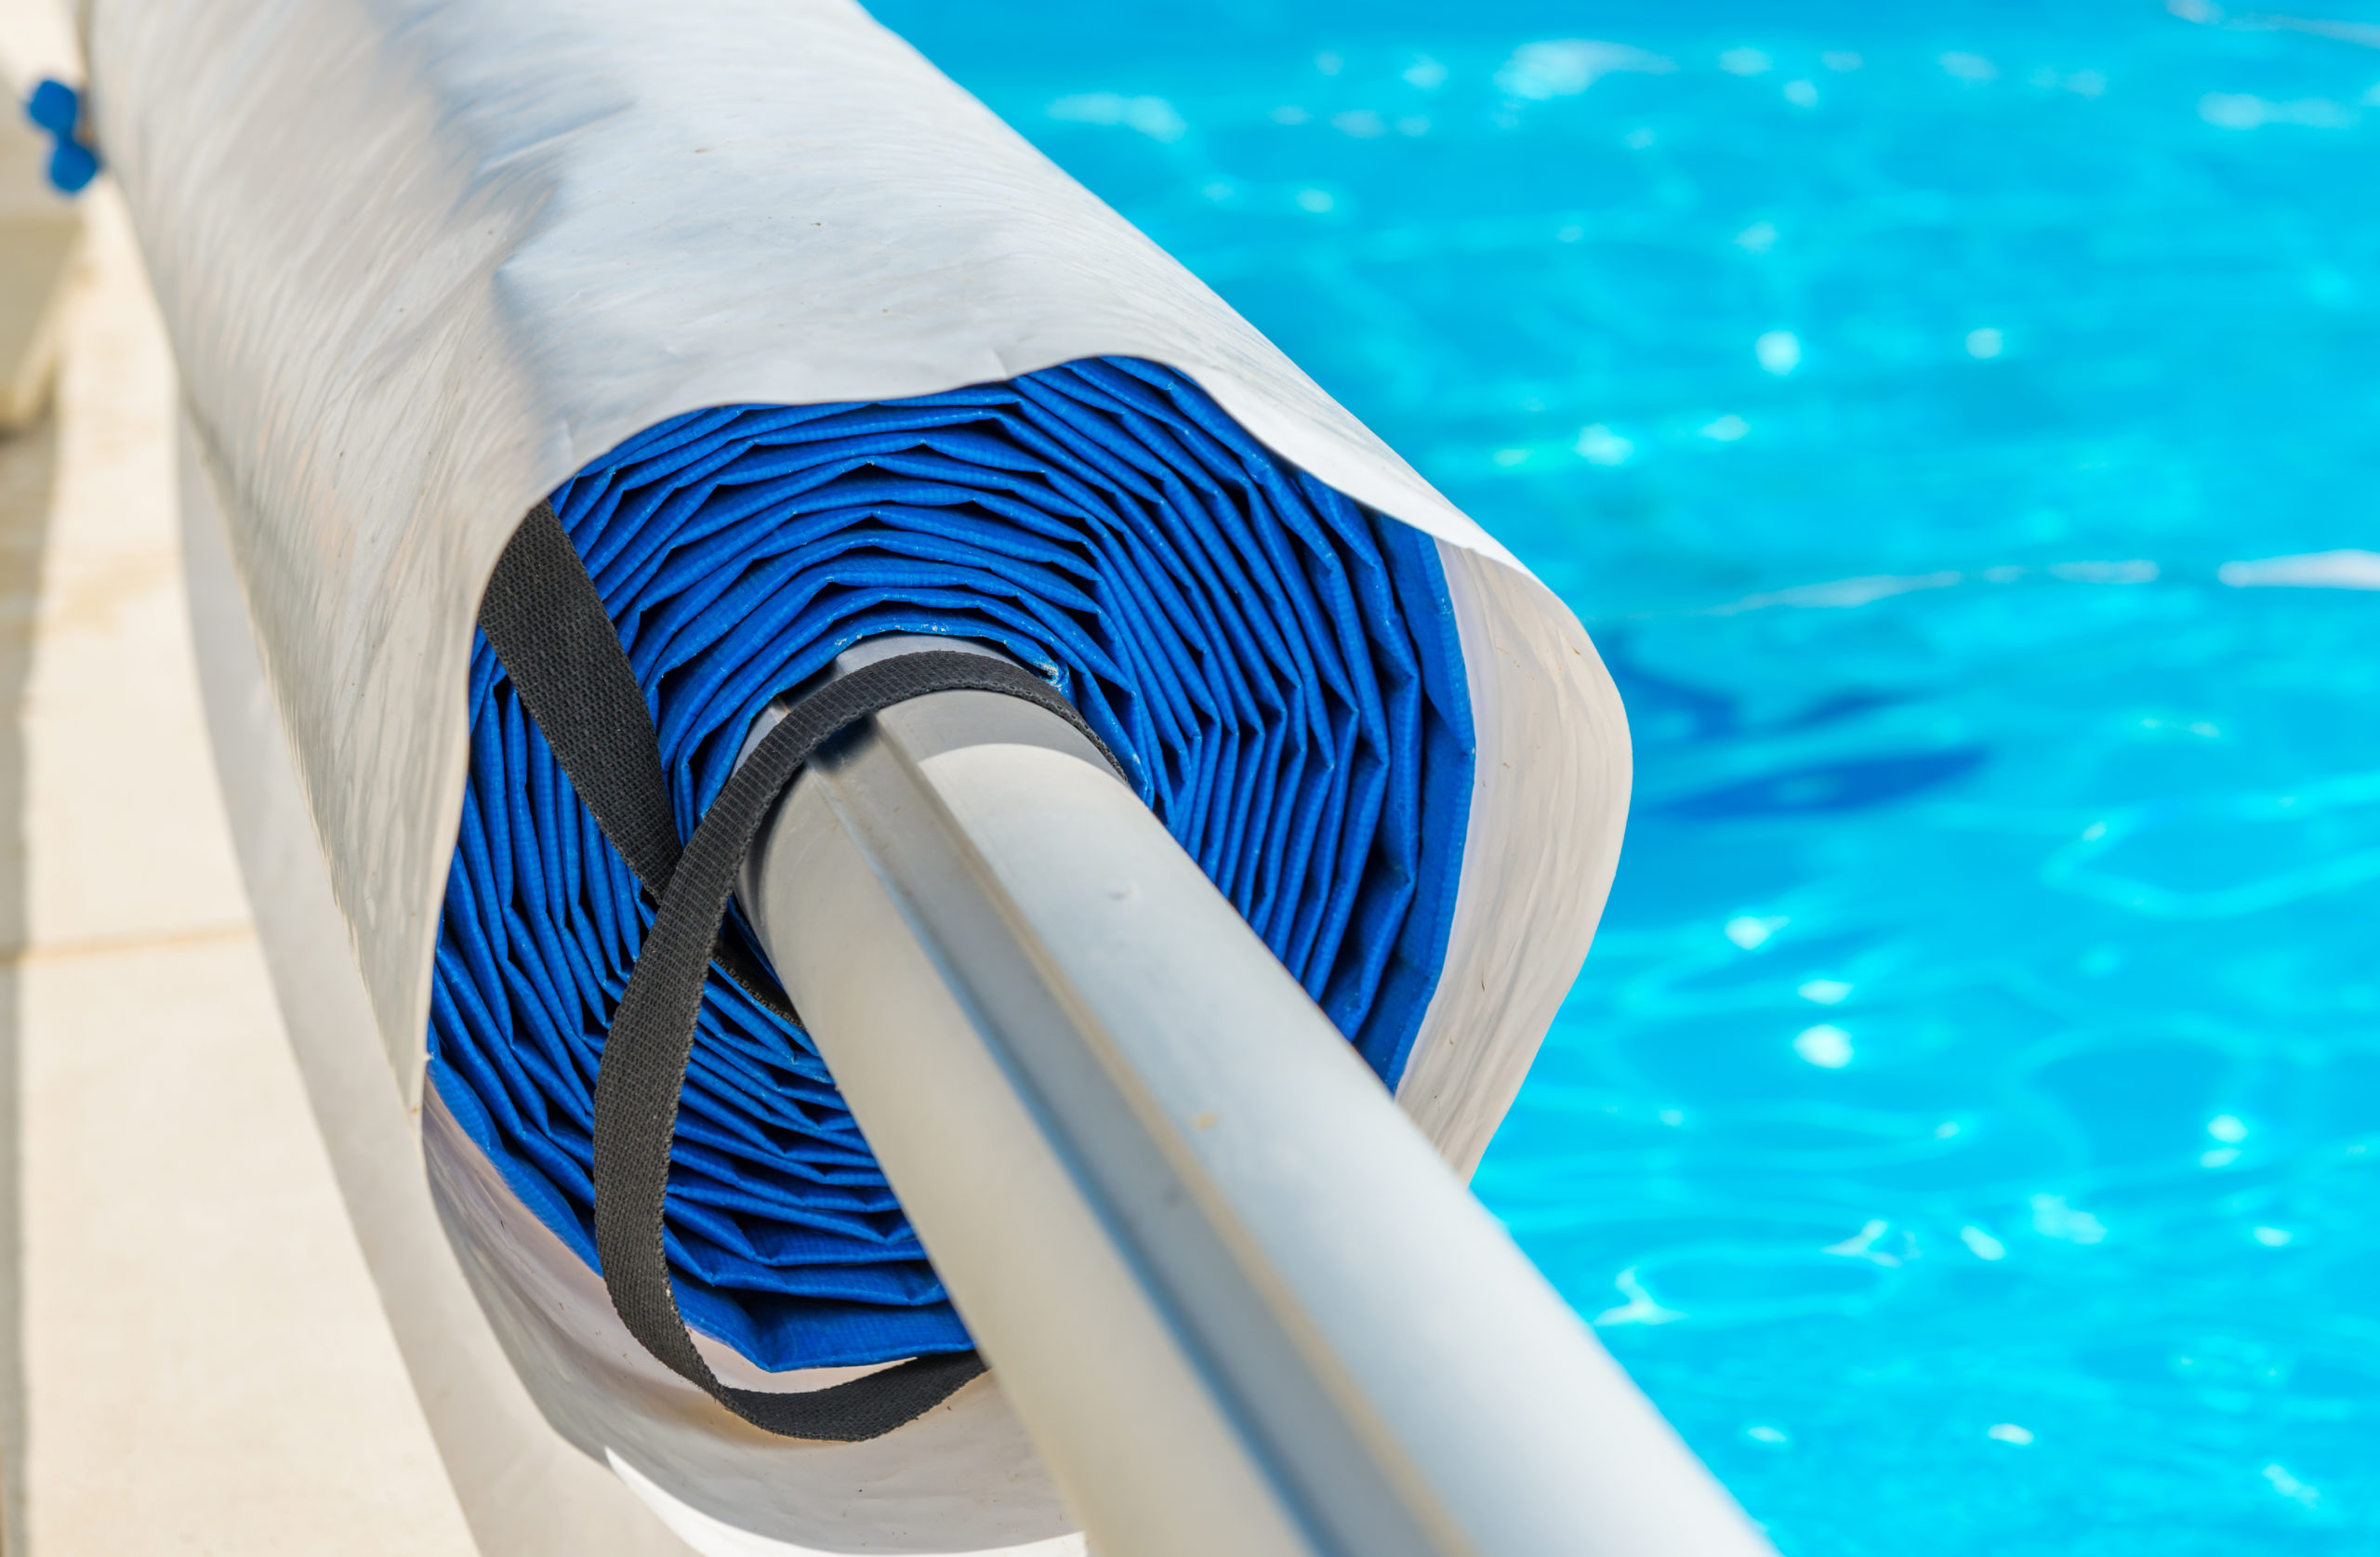 A rolled pool cover neatly stored at the edge of a swimming pool, ready to be unrolled for pool protection and maintenance.